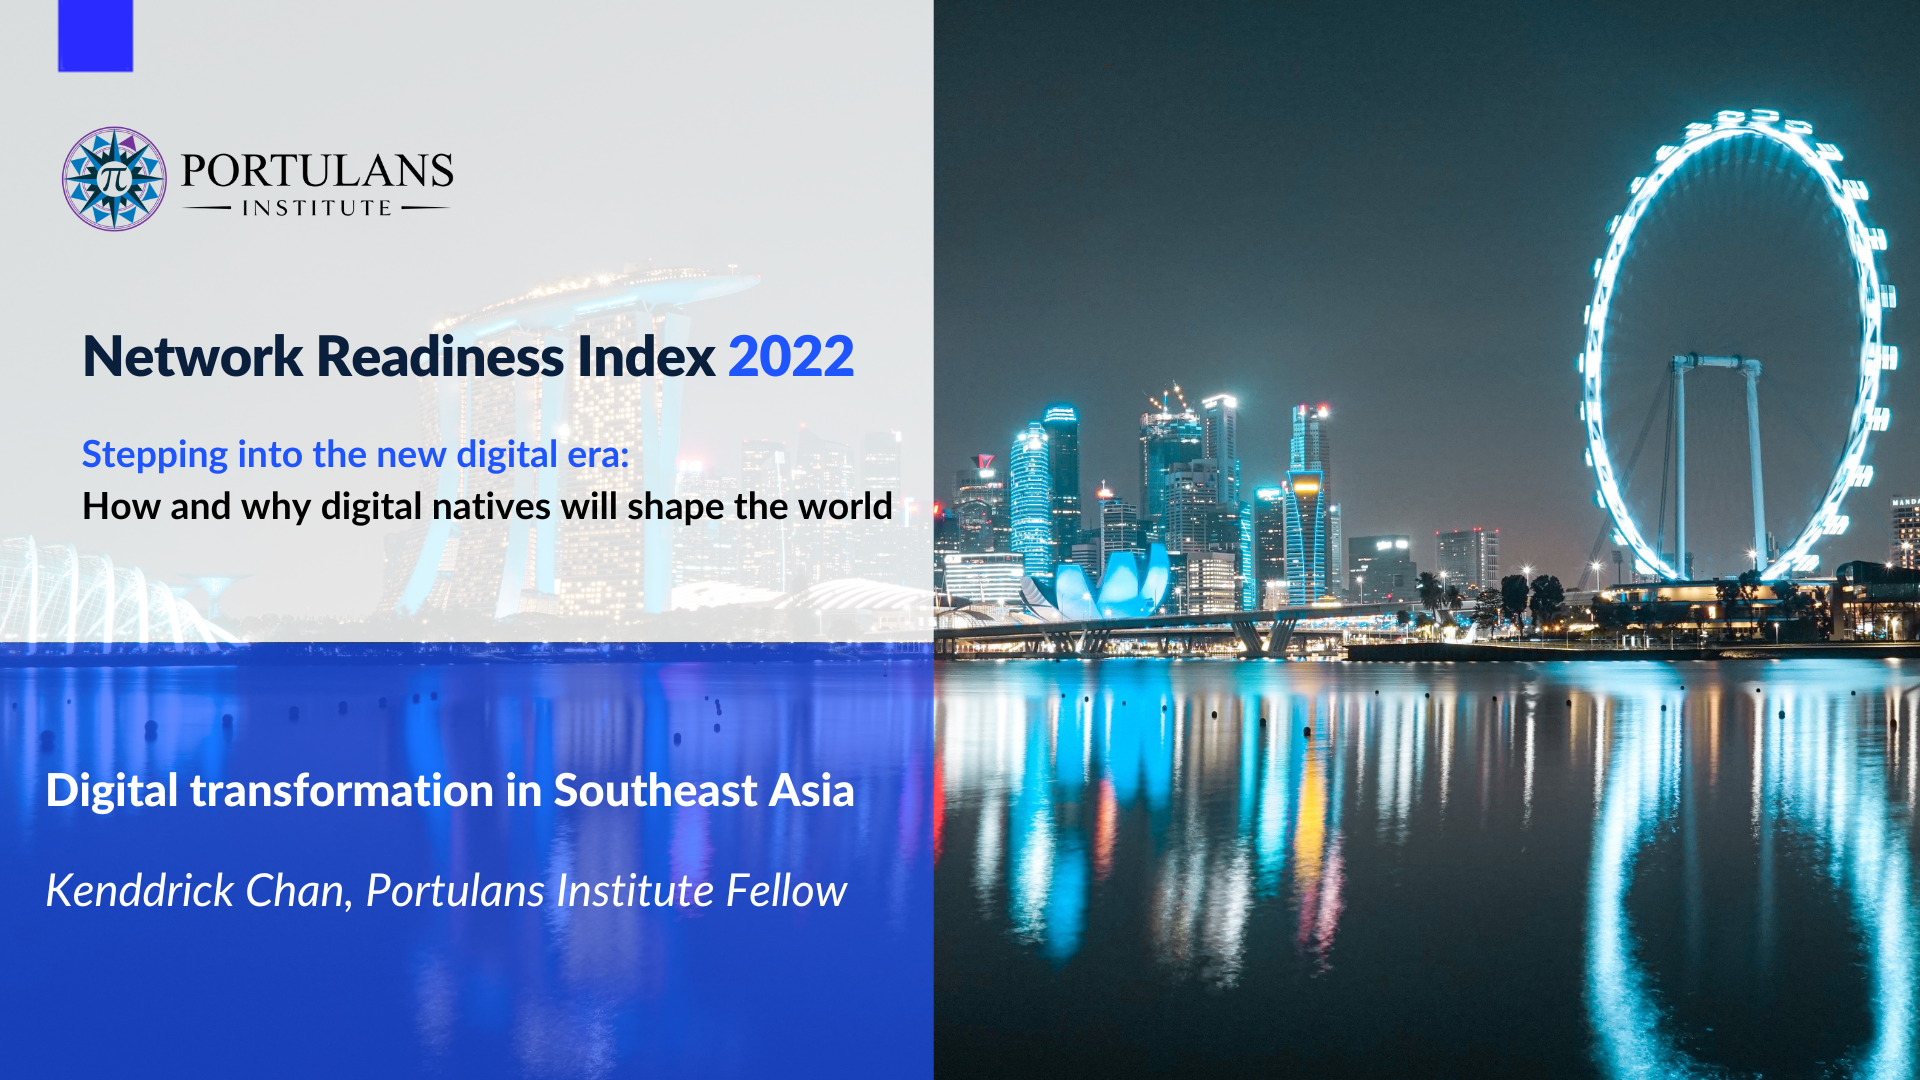 Reviewing the state of Southeast Asia’s digital transformation and opportunities for the region moving forward